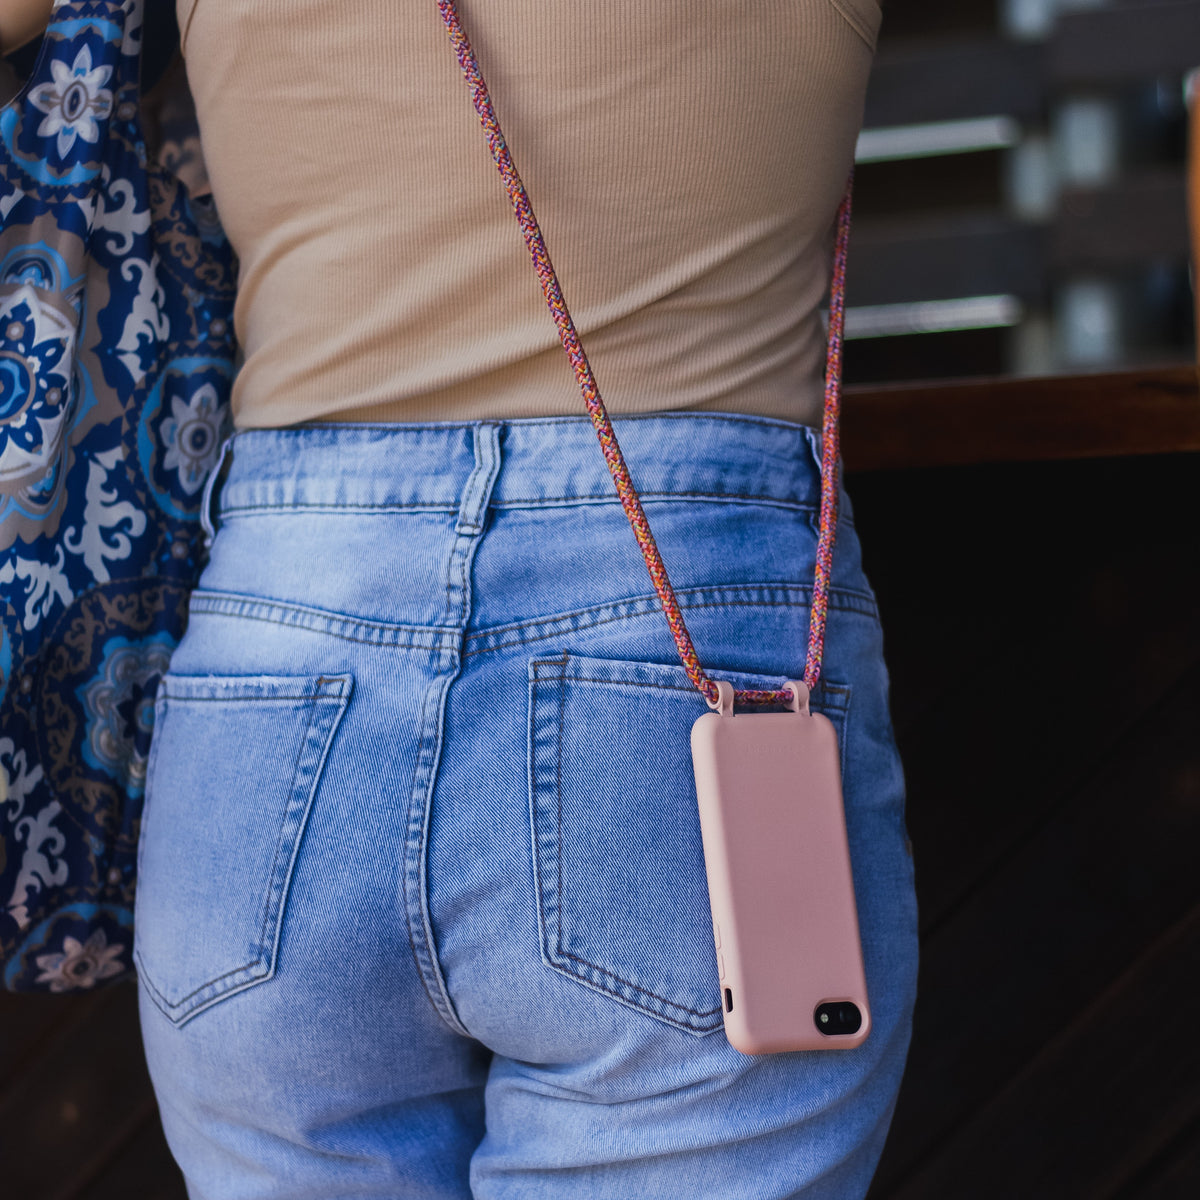 iPhone 11 ROSÉ PINK CASE + RAINBOW RED CORD